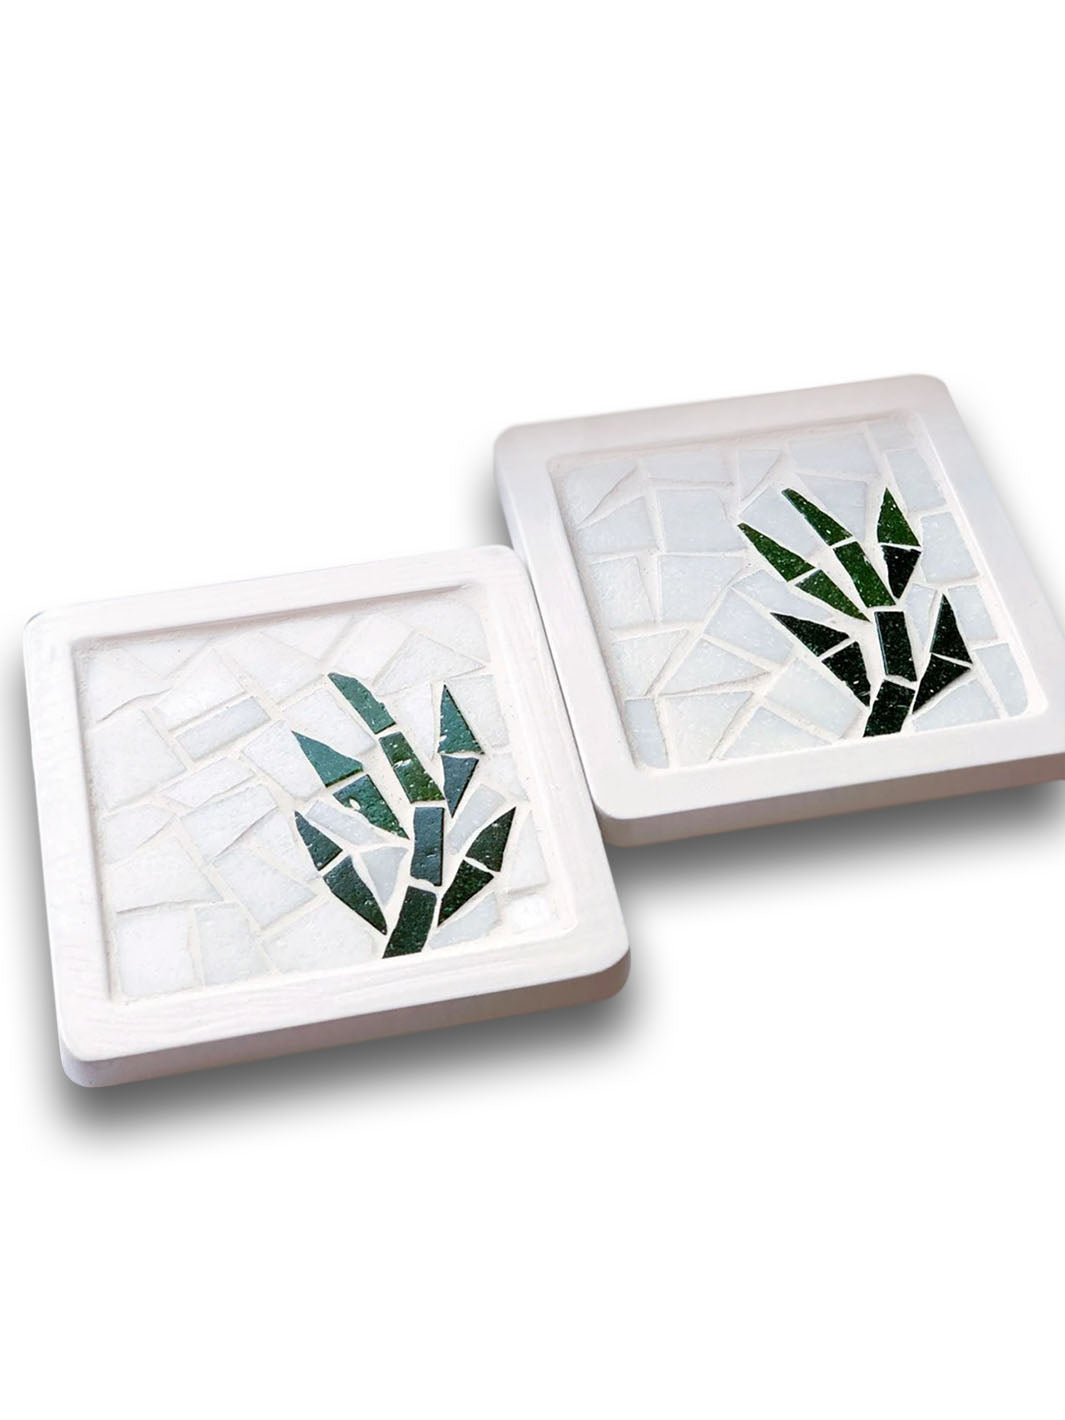 Artistic Handcrafted Wooden Palmera Mosaic Tray & Coaster Set Deco Serving Trays DCB0021-1